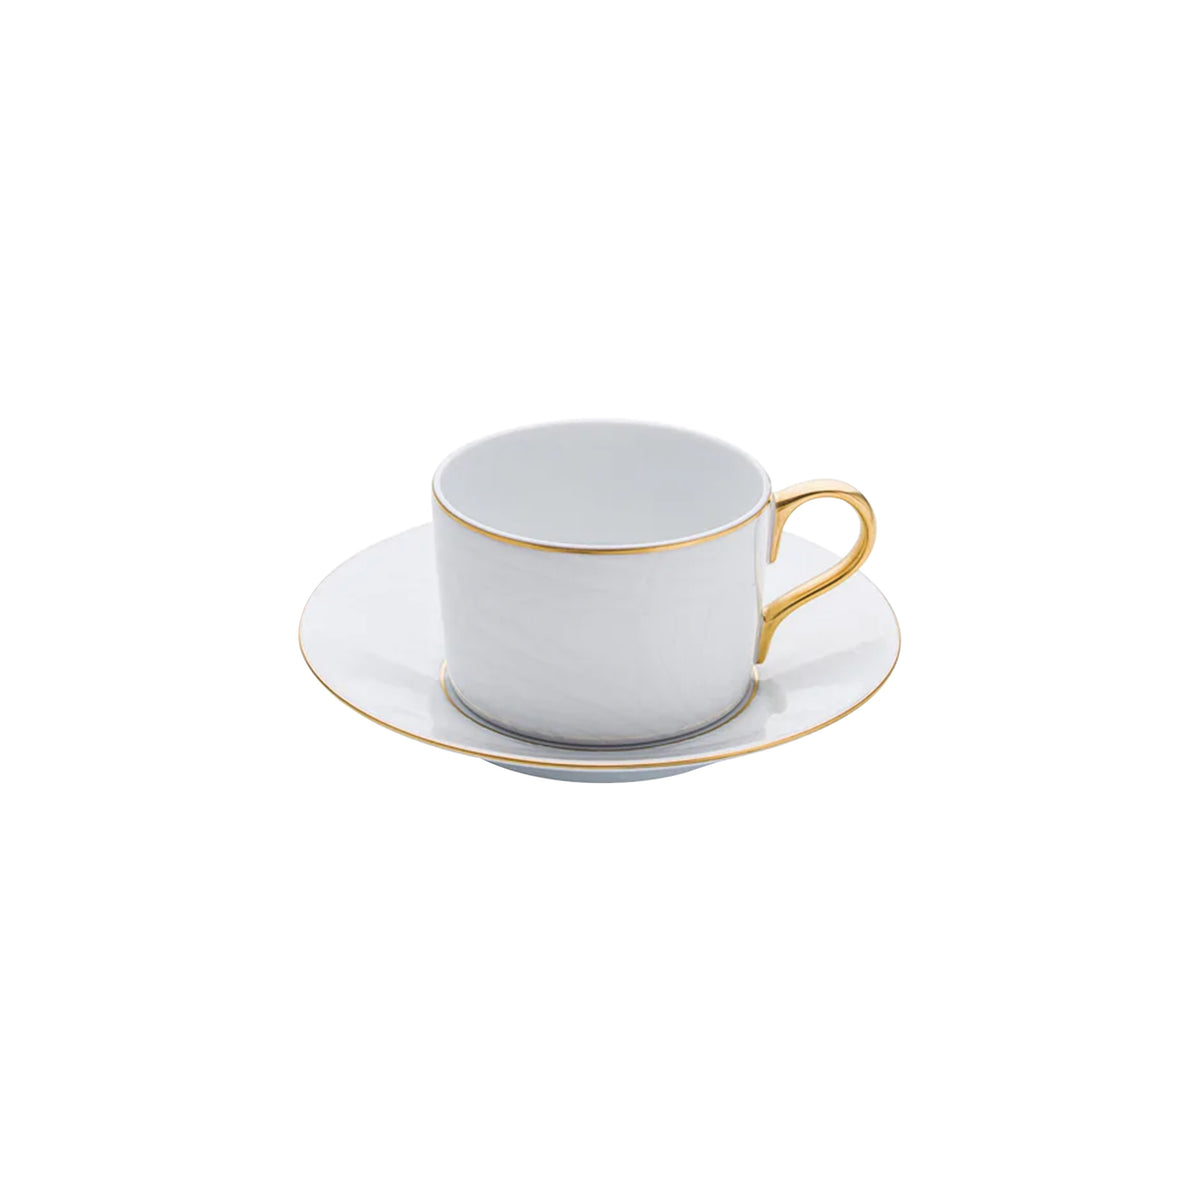 Indiennes White on White gold net - Tea cup and saucer